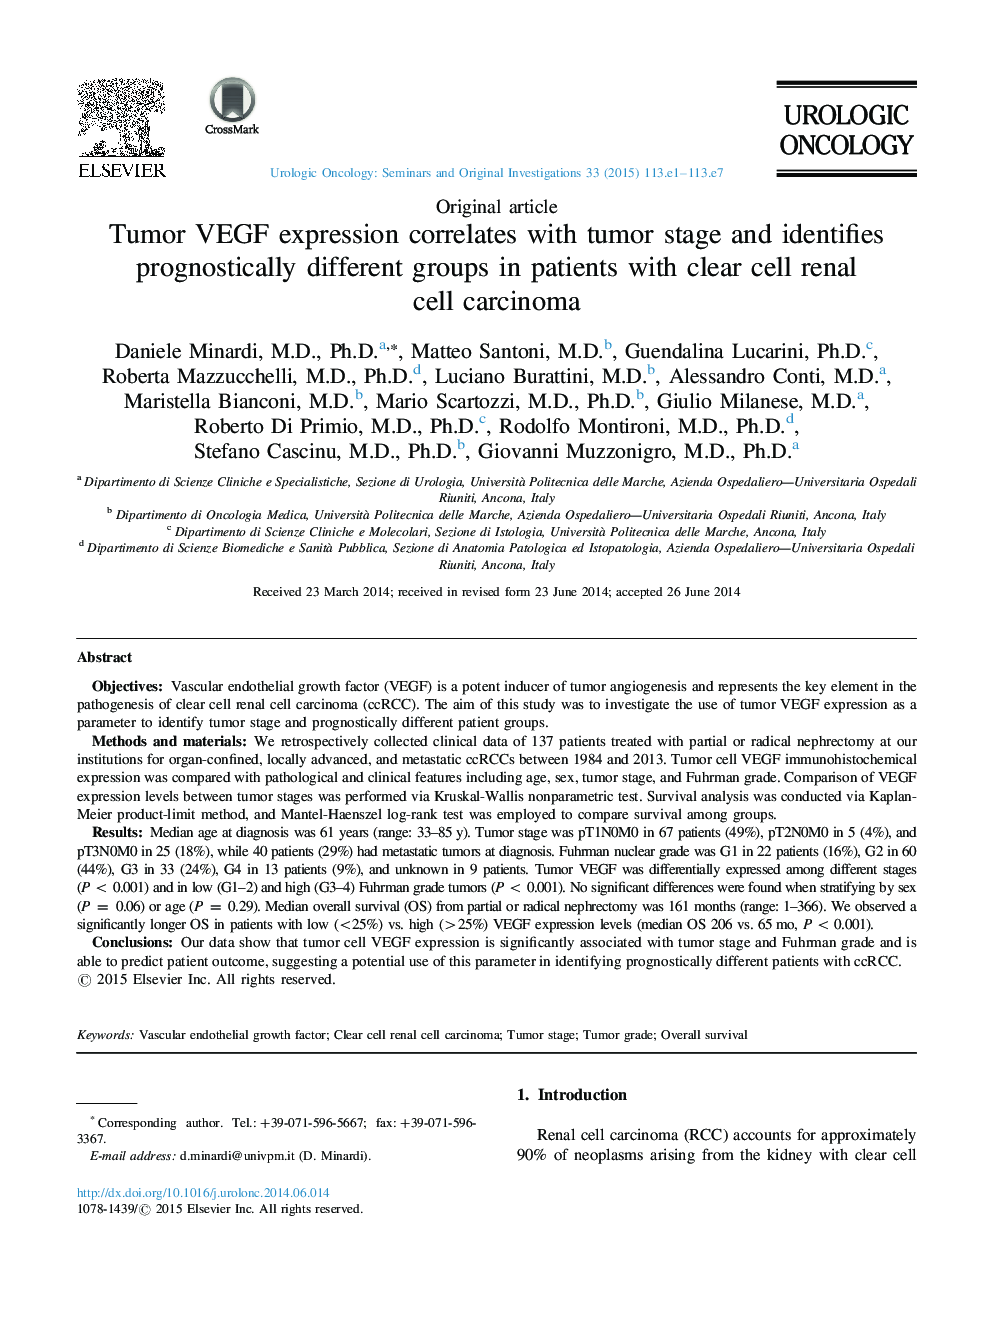 Tumor VEGF expression correlates with tumor stage and identifies prognostically different groups in patients with clear cell renal cell carcinoma